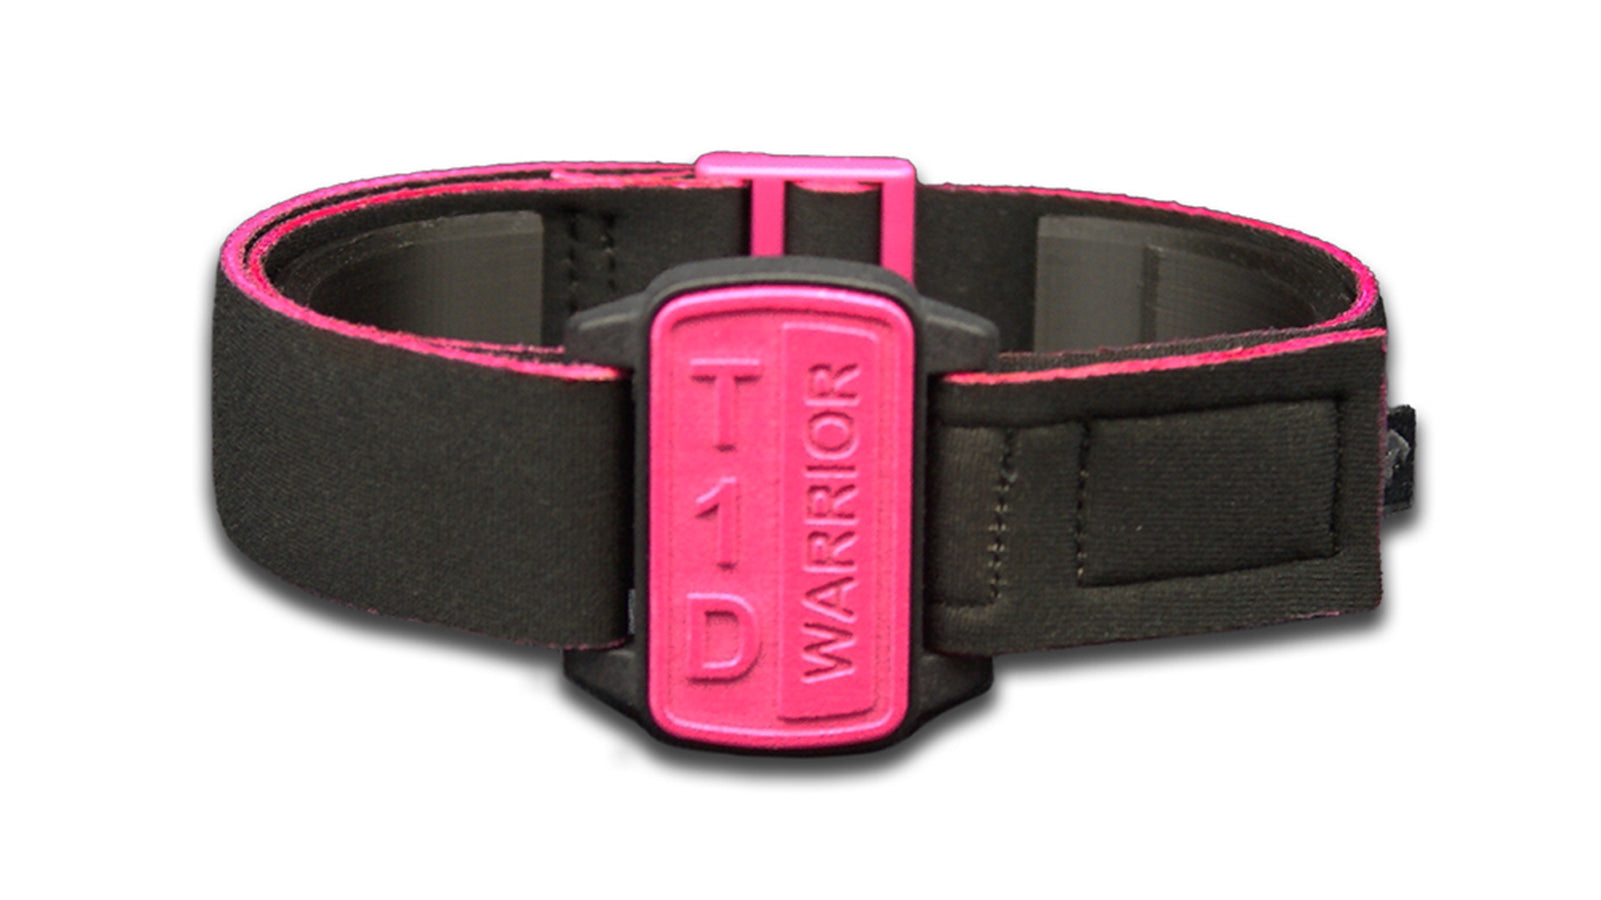 Dexband armband cover in magenta with motif T1D Warrior. Black strap edged in coordinating magenta.